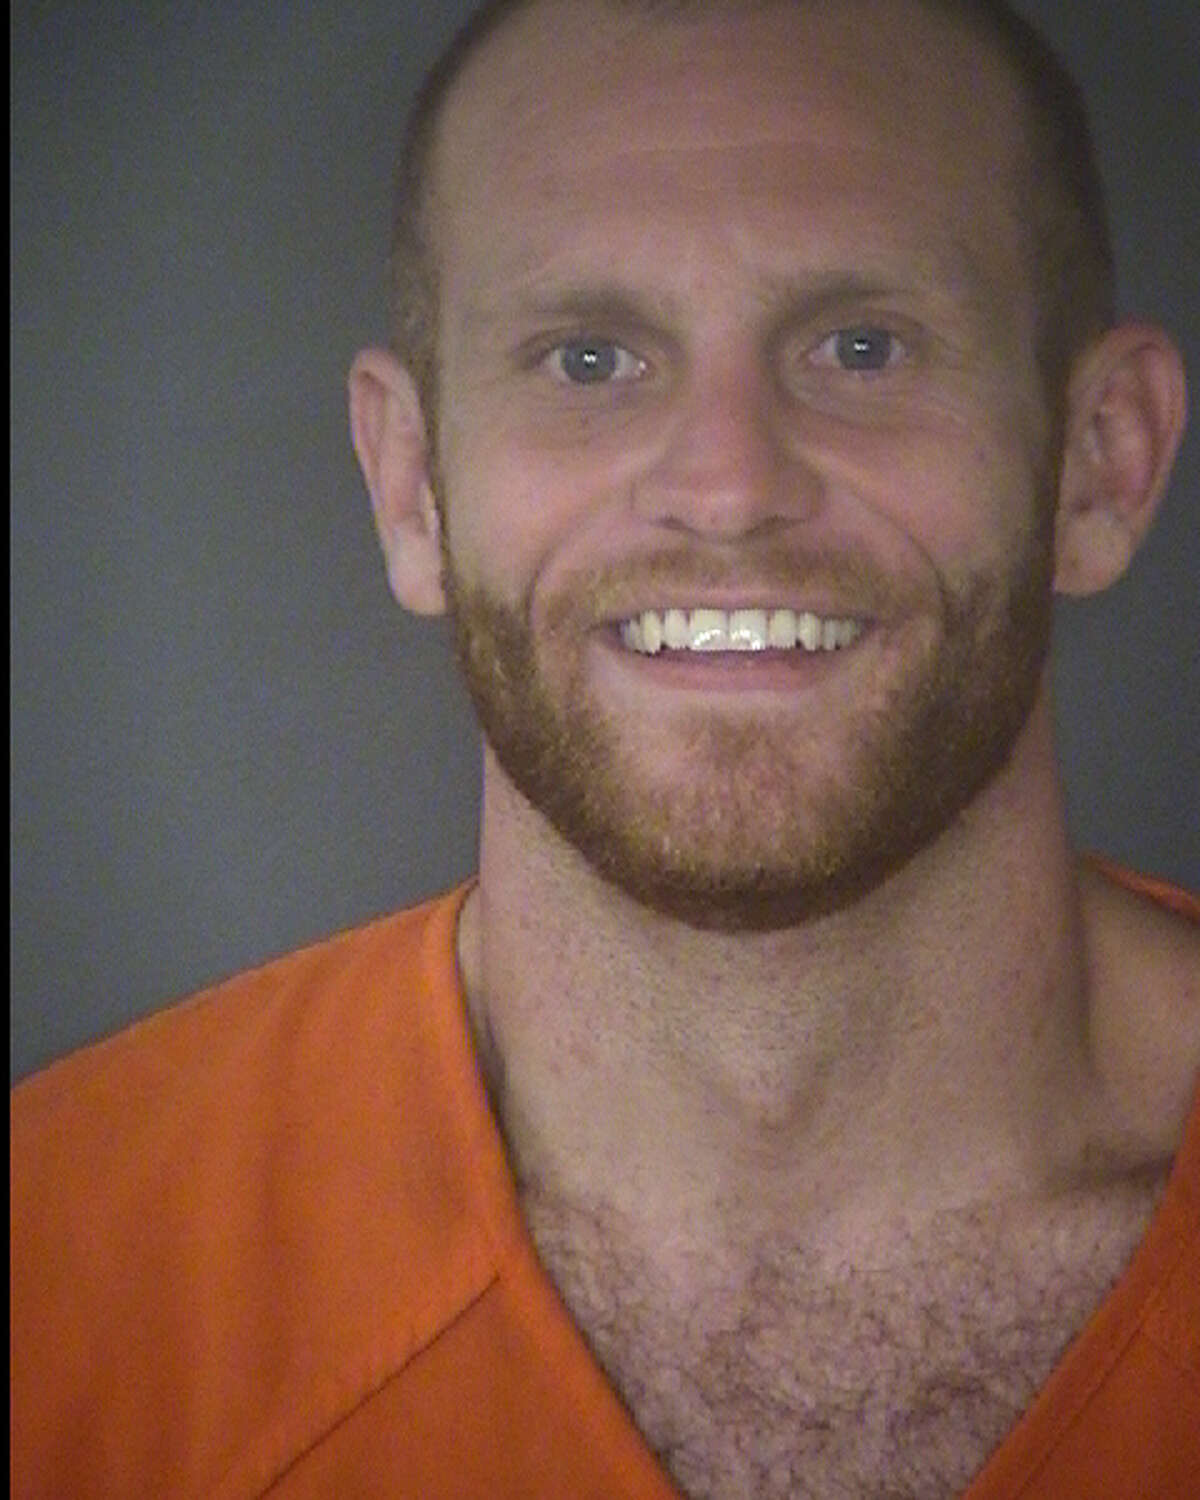 The suspect, 26-year-old Russell Wayne Collins, is now facing a charge of aggravated assault causing severe bodily injury. He was booked into the Bexar County Jail on a $75,000 bond.